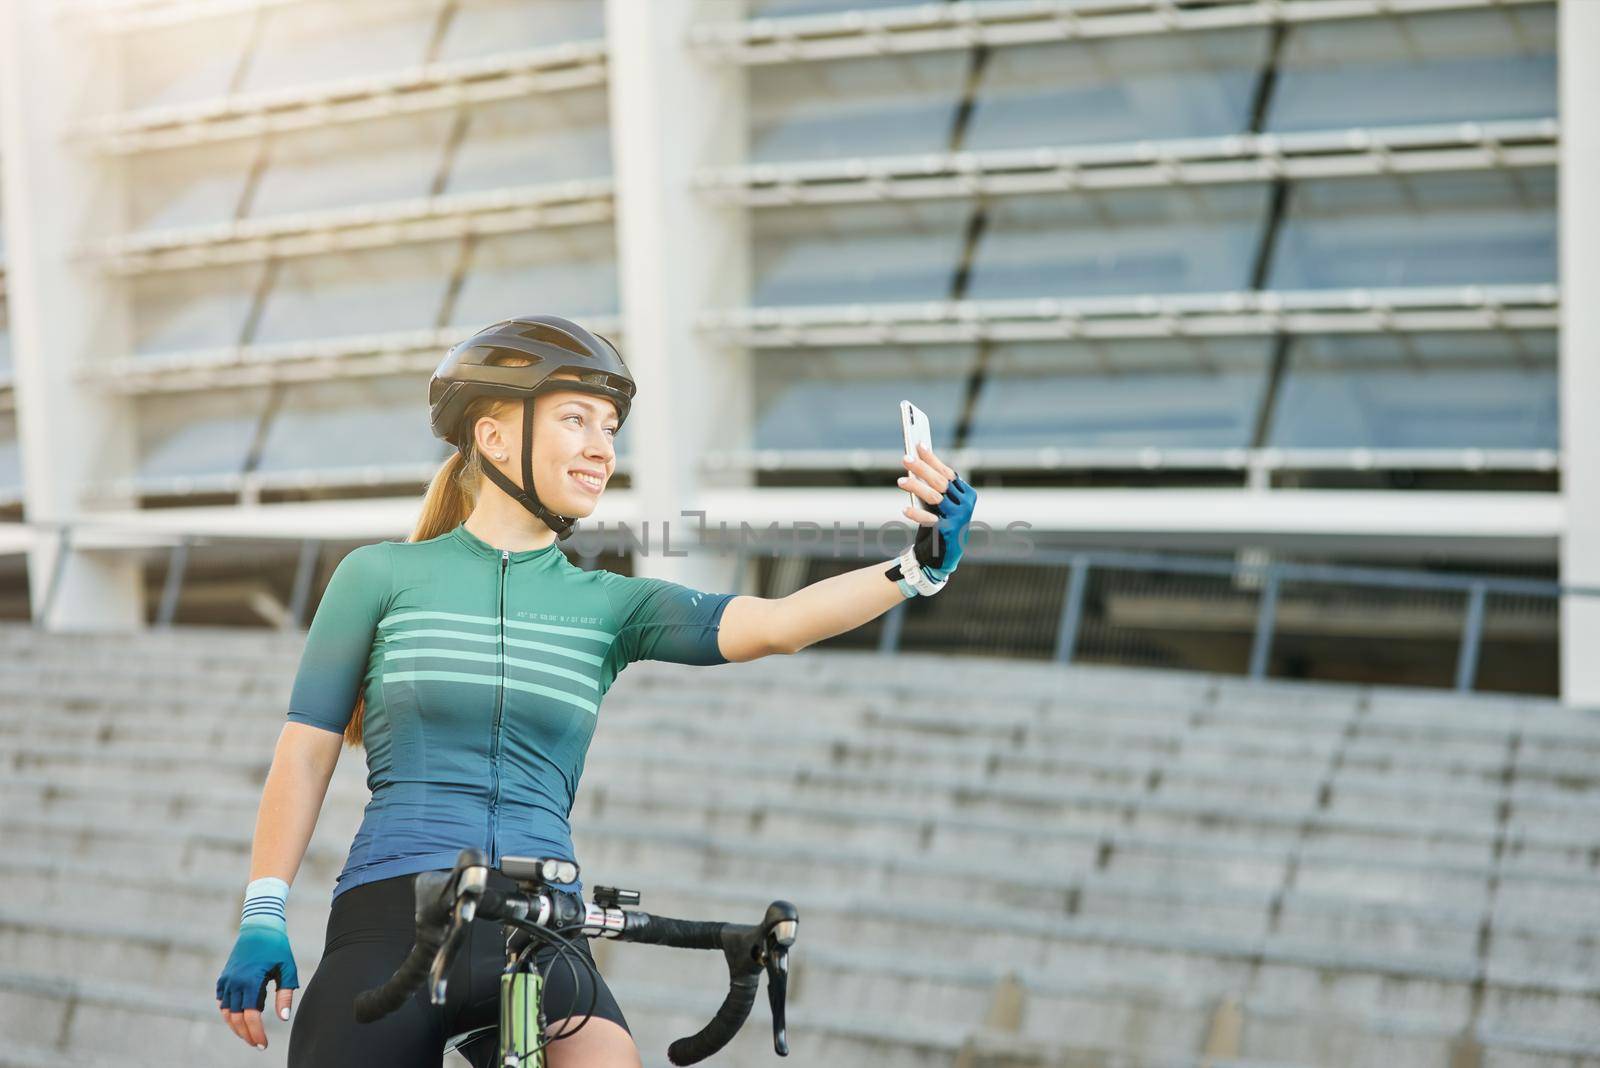 Adorable young woman, professional female cyclist smiling while holding smartphone and taking selfie, standing with her bike outdoors on a daytime. Active lifestyle, sports concept